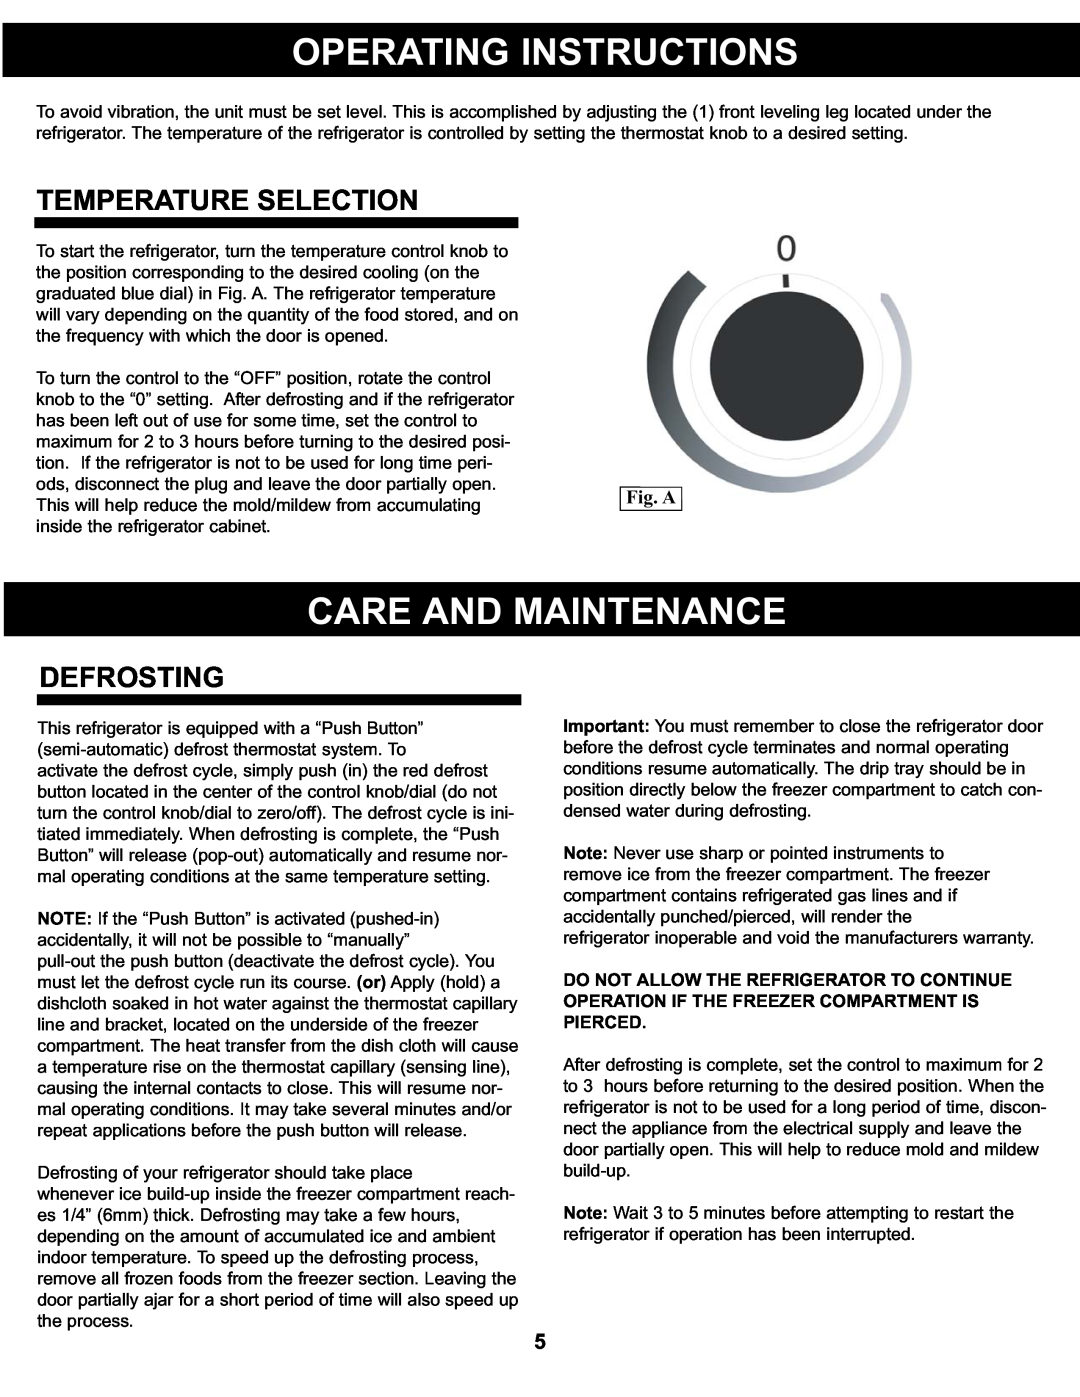 Sunbeam SBCR122BSL manual Operating Instructions, Care And Maintenance, Temperature Selection, Defrosting, Fig. A 